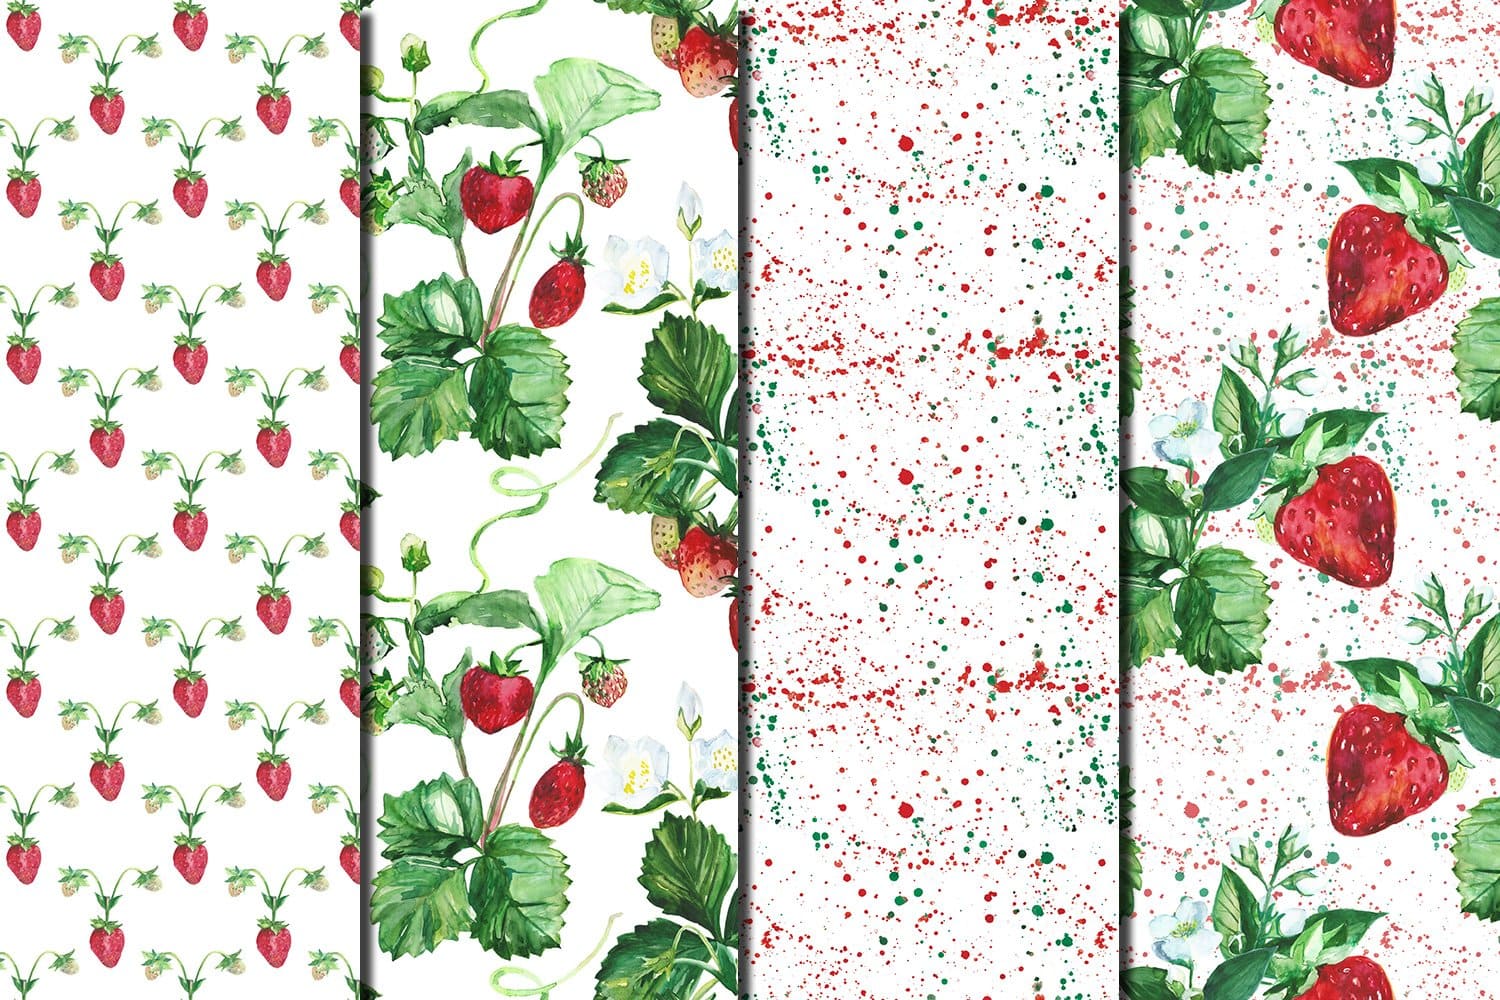 Patterns with strawberries on white, red and green backgrounds.